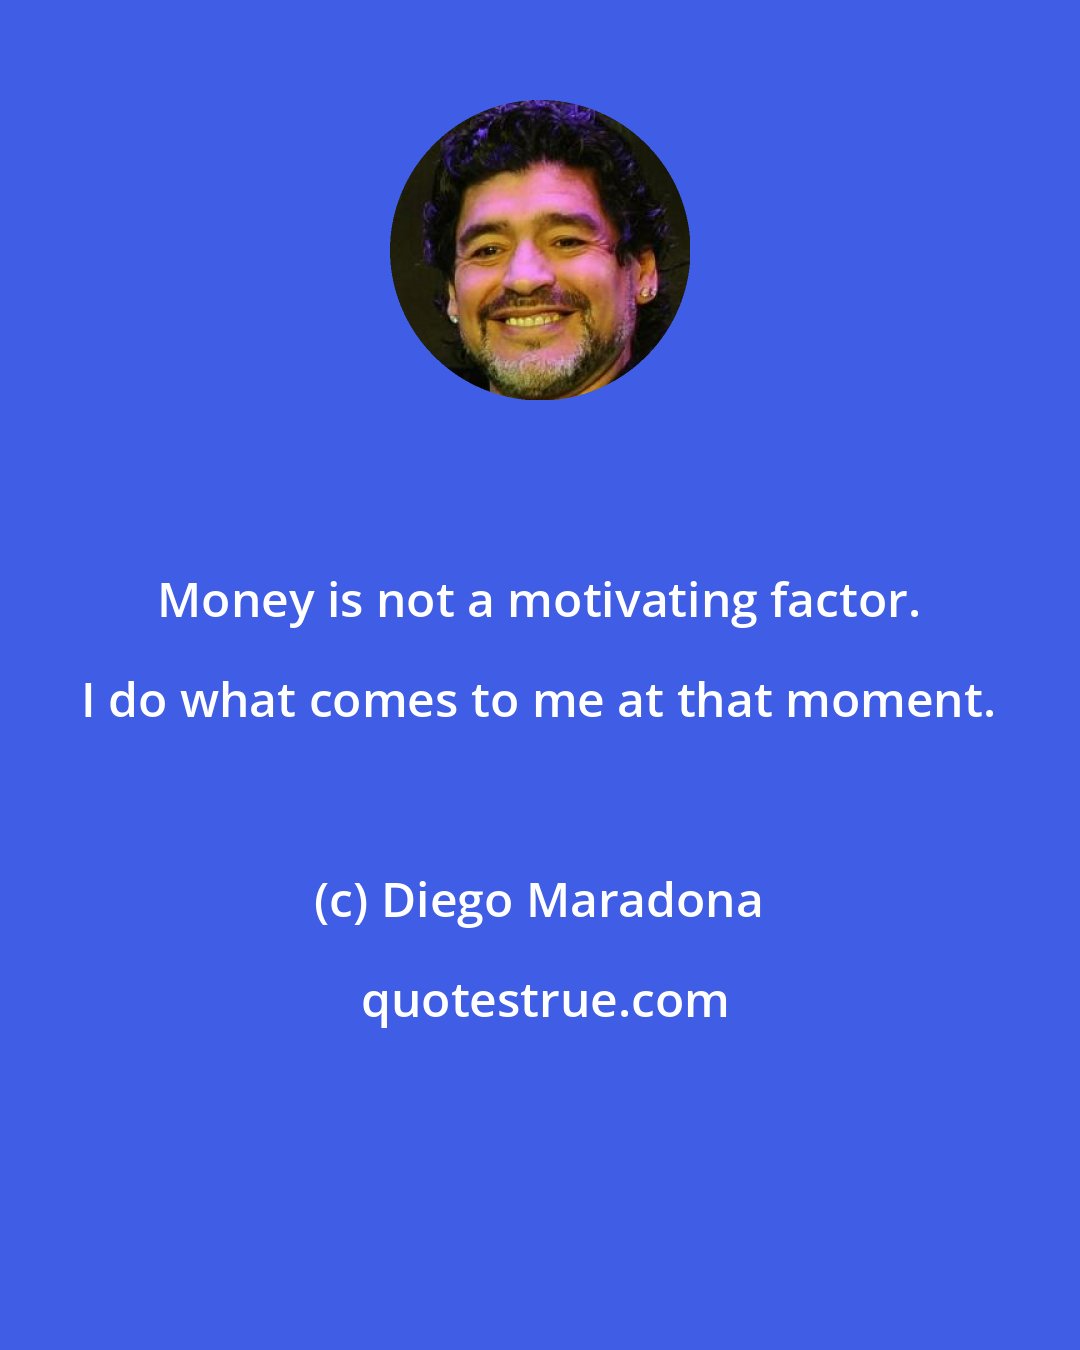 Diego Maradona: Money is not a motivating factor. I do what comes to me at that moment.